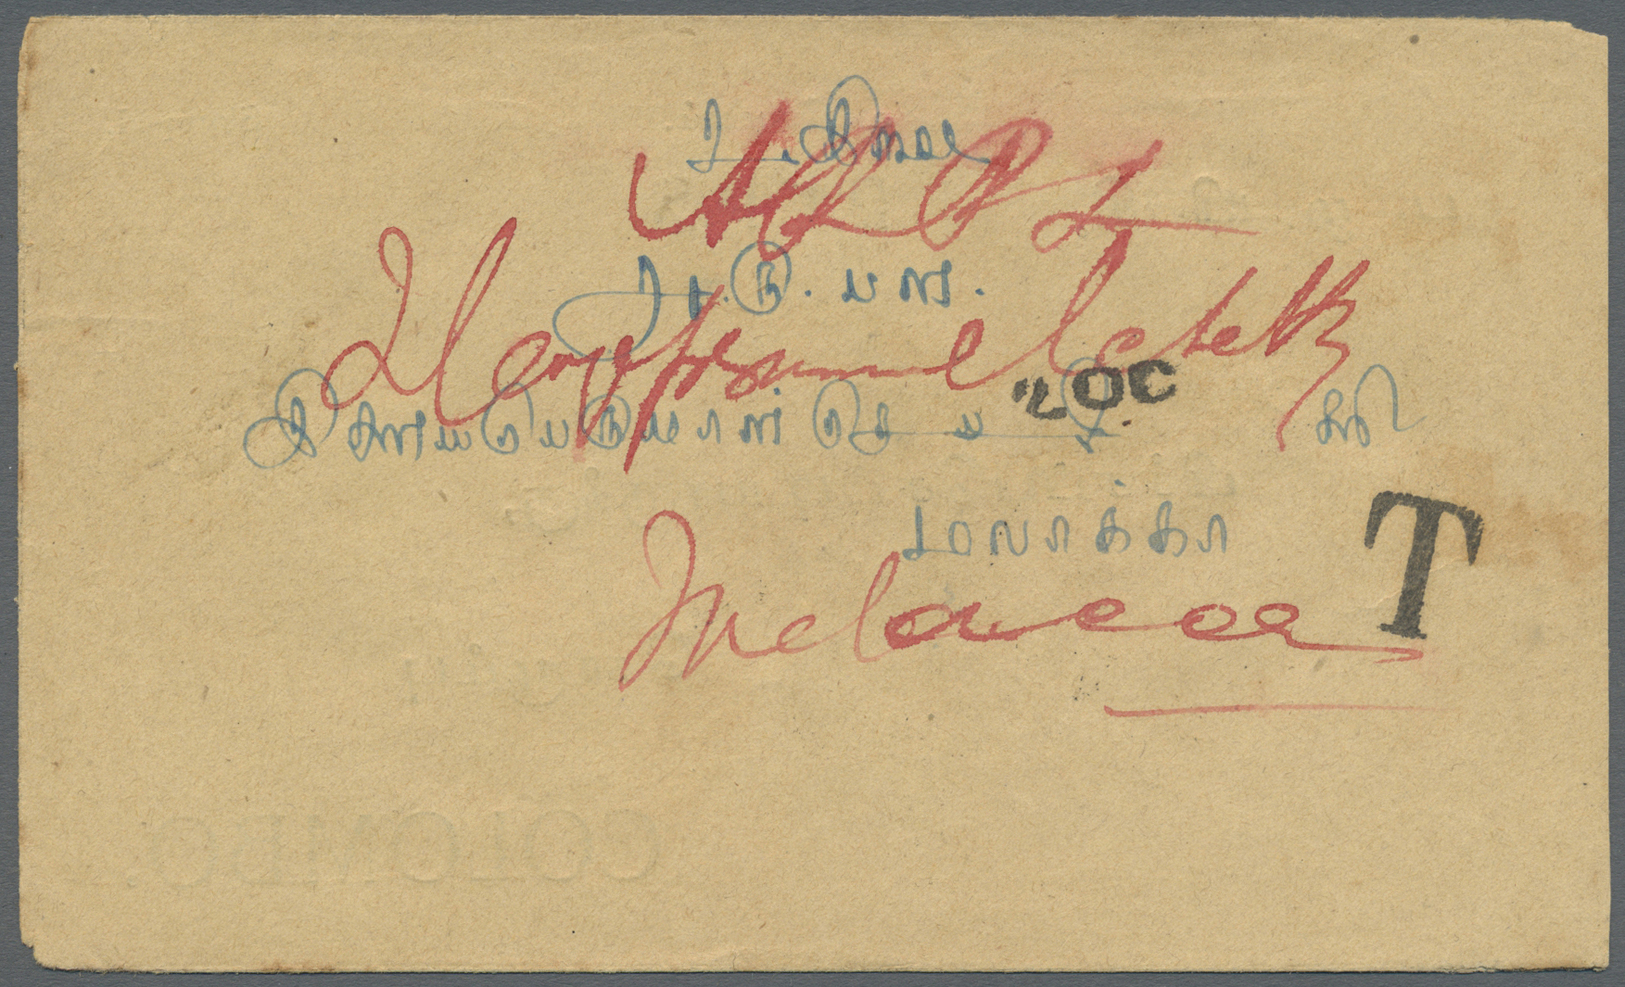 Br Malaiische Staaten - Straits Settlements - Portomarken: 1924-1936, small group of 14 taxed covers from India to Malac